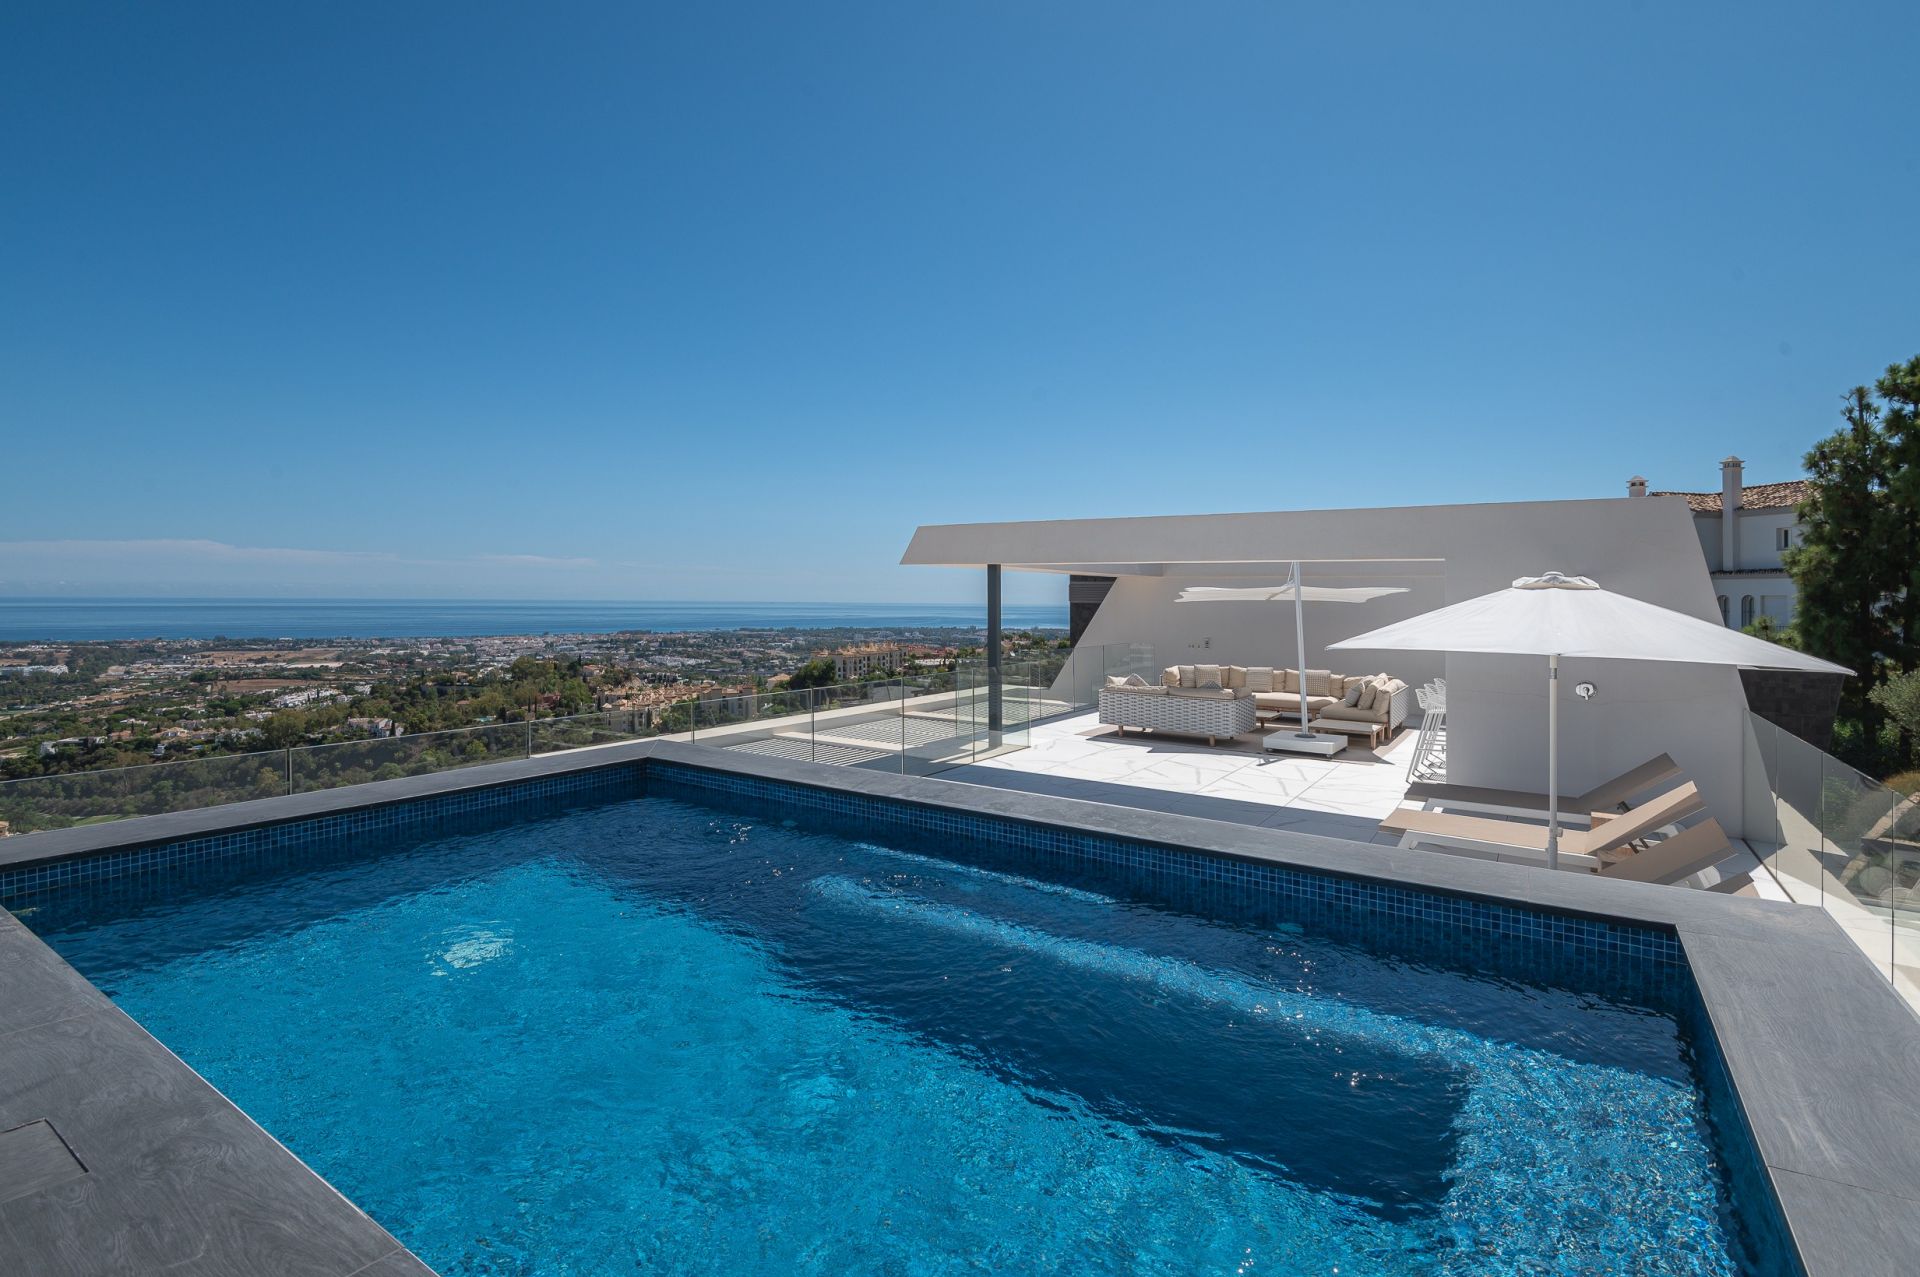 Luxurious penthouse with exquisite design and breathtaking views | Engel & Völkers Marbella